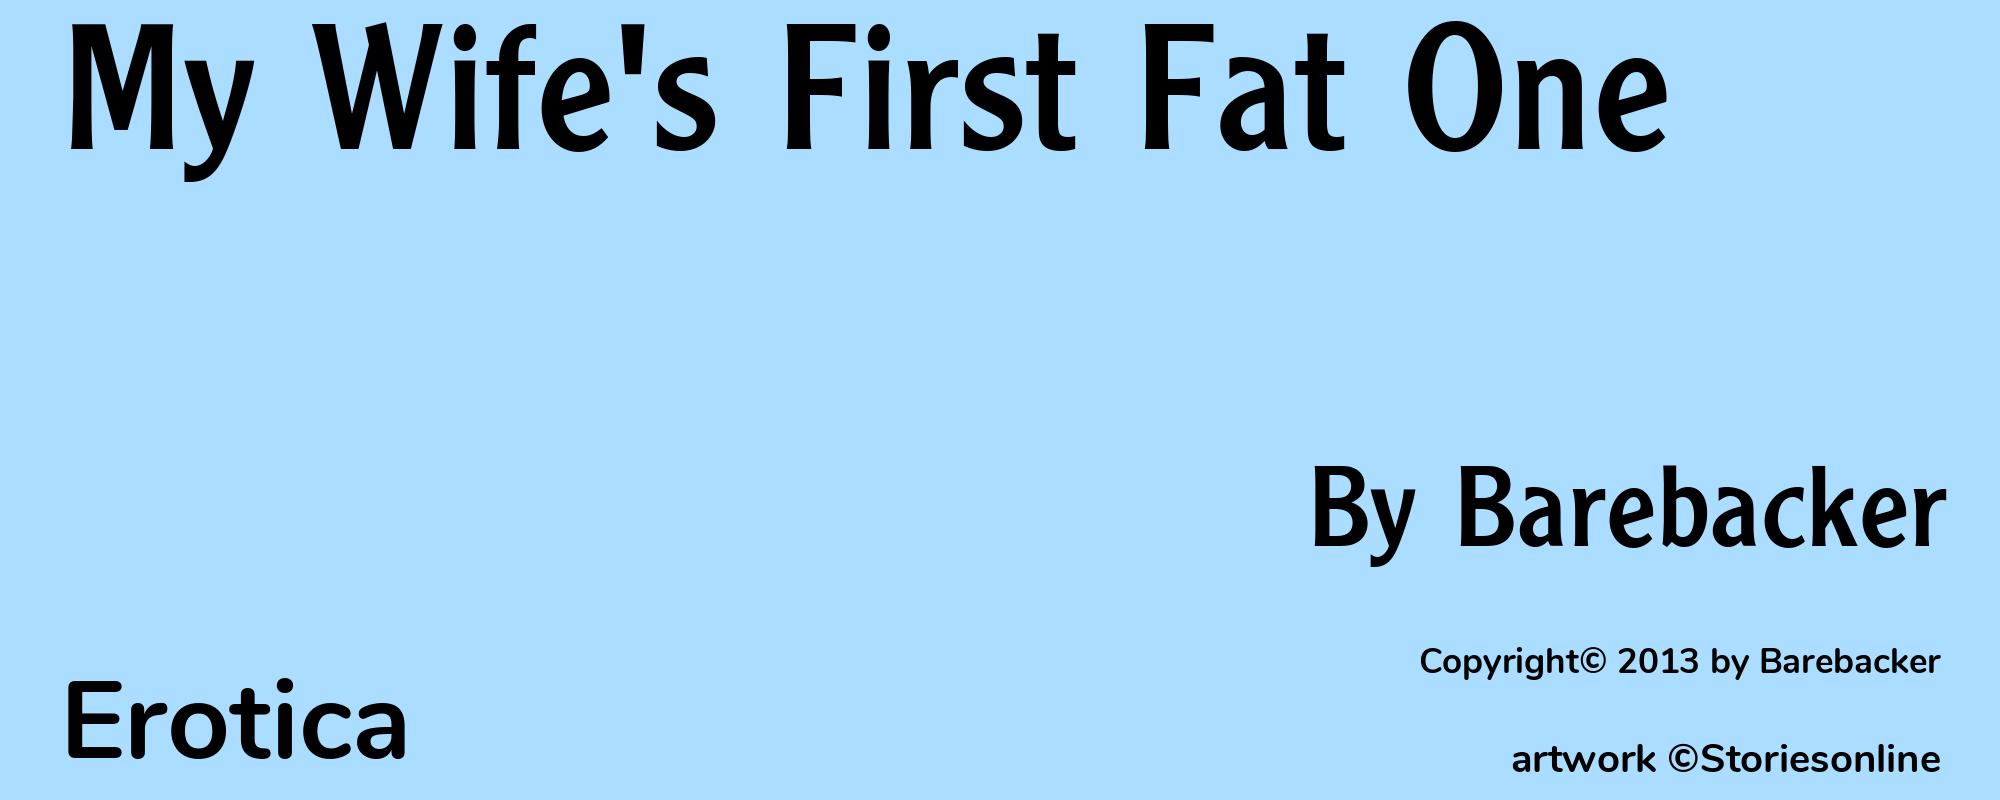 My Wife's First Fat One - Cover